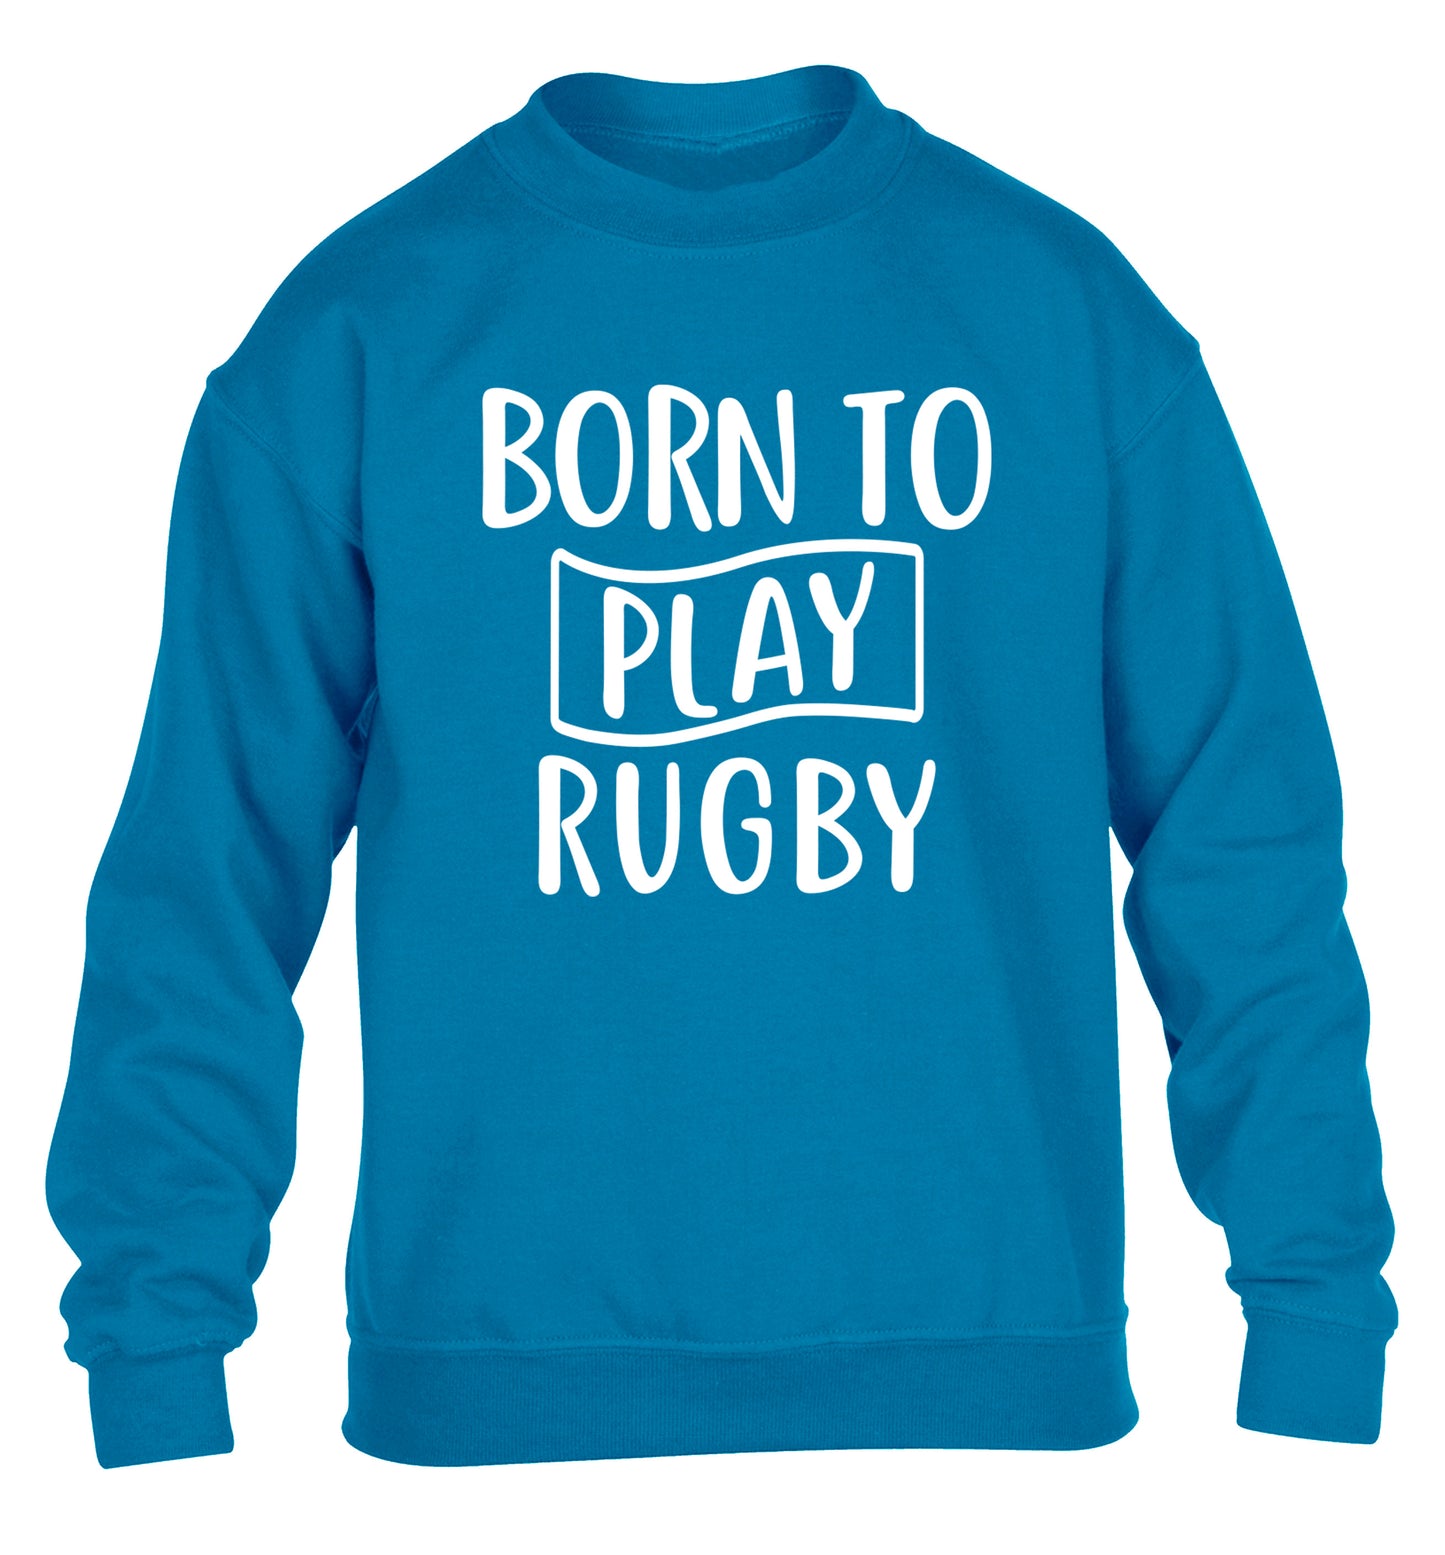 Born to play rugby children's blue sweater 12-13 Years